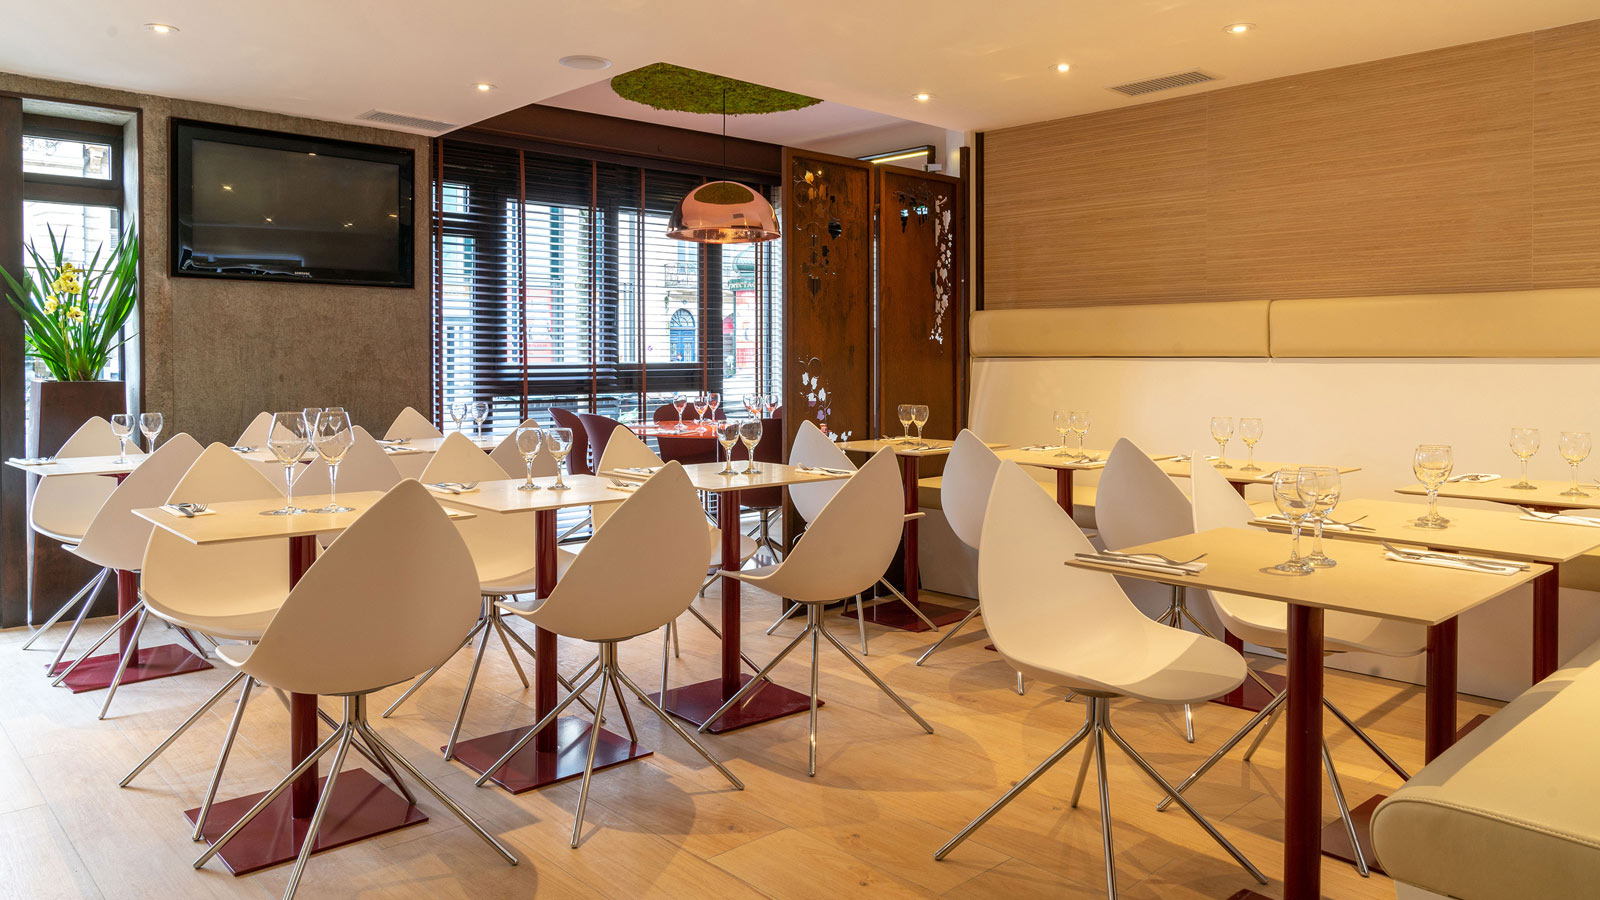 PORCELANOSA Group Projects: The Le Grand Café restaurant in Bordeaux extends its menu through materials from the PORCELANOSA Group